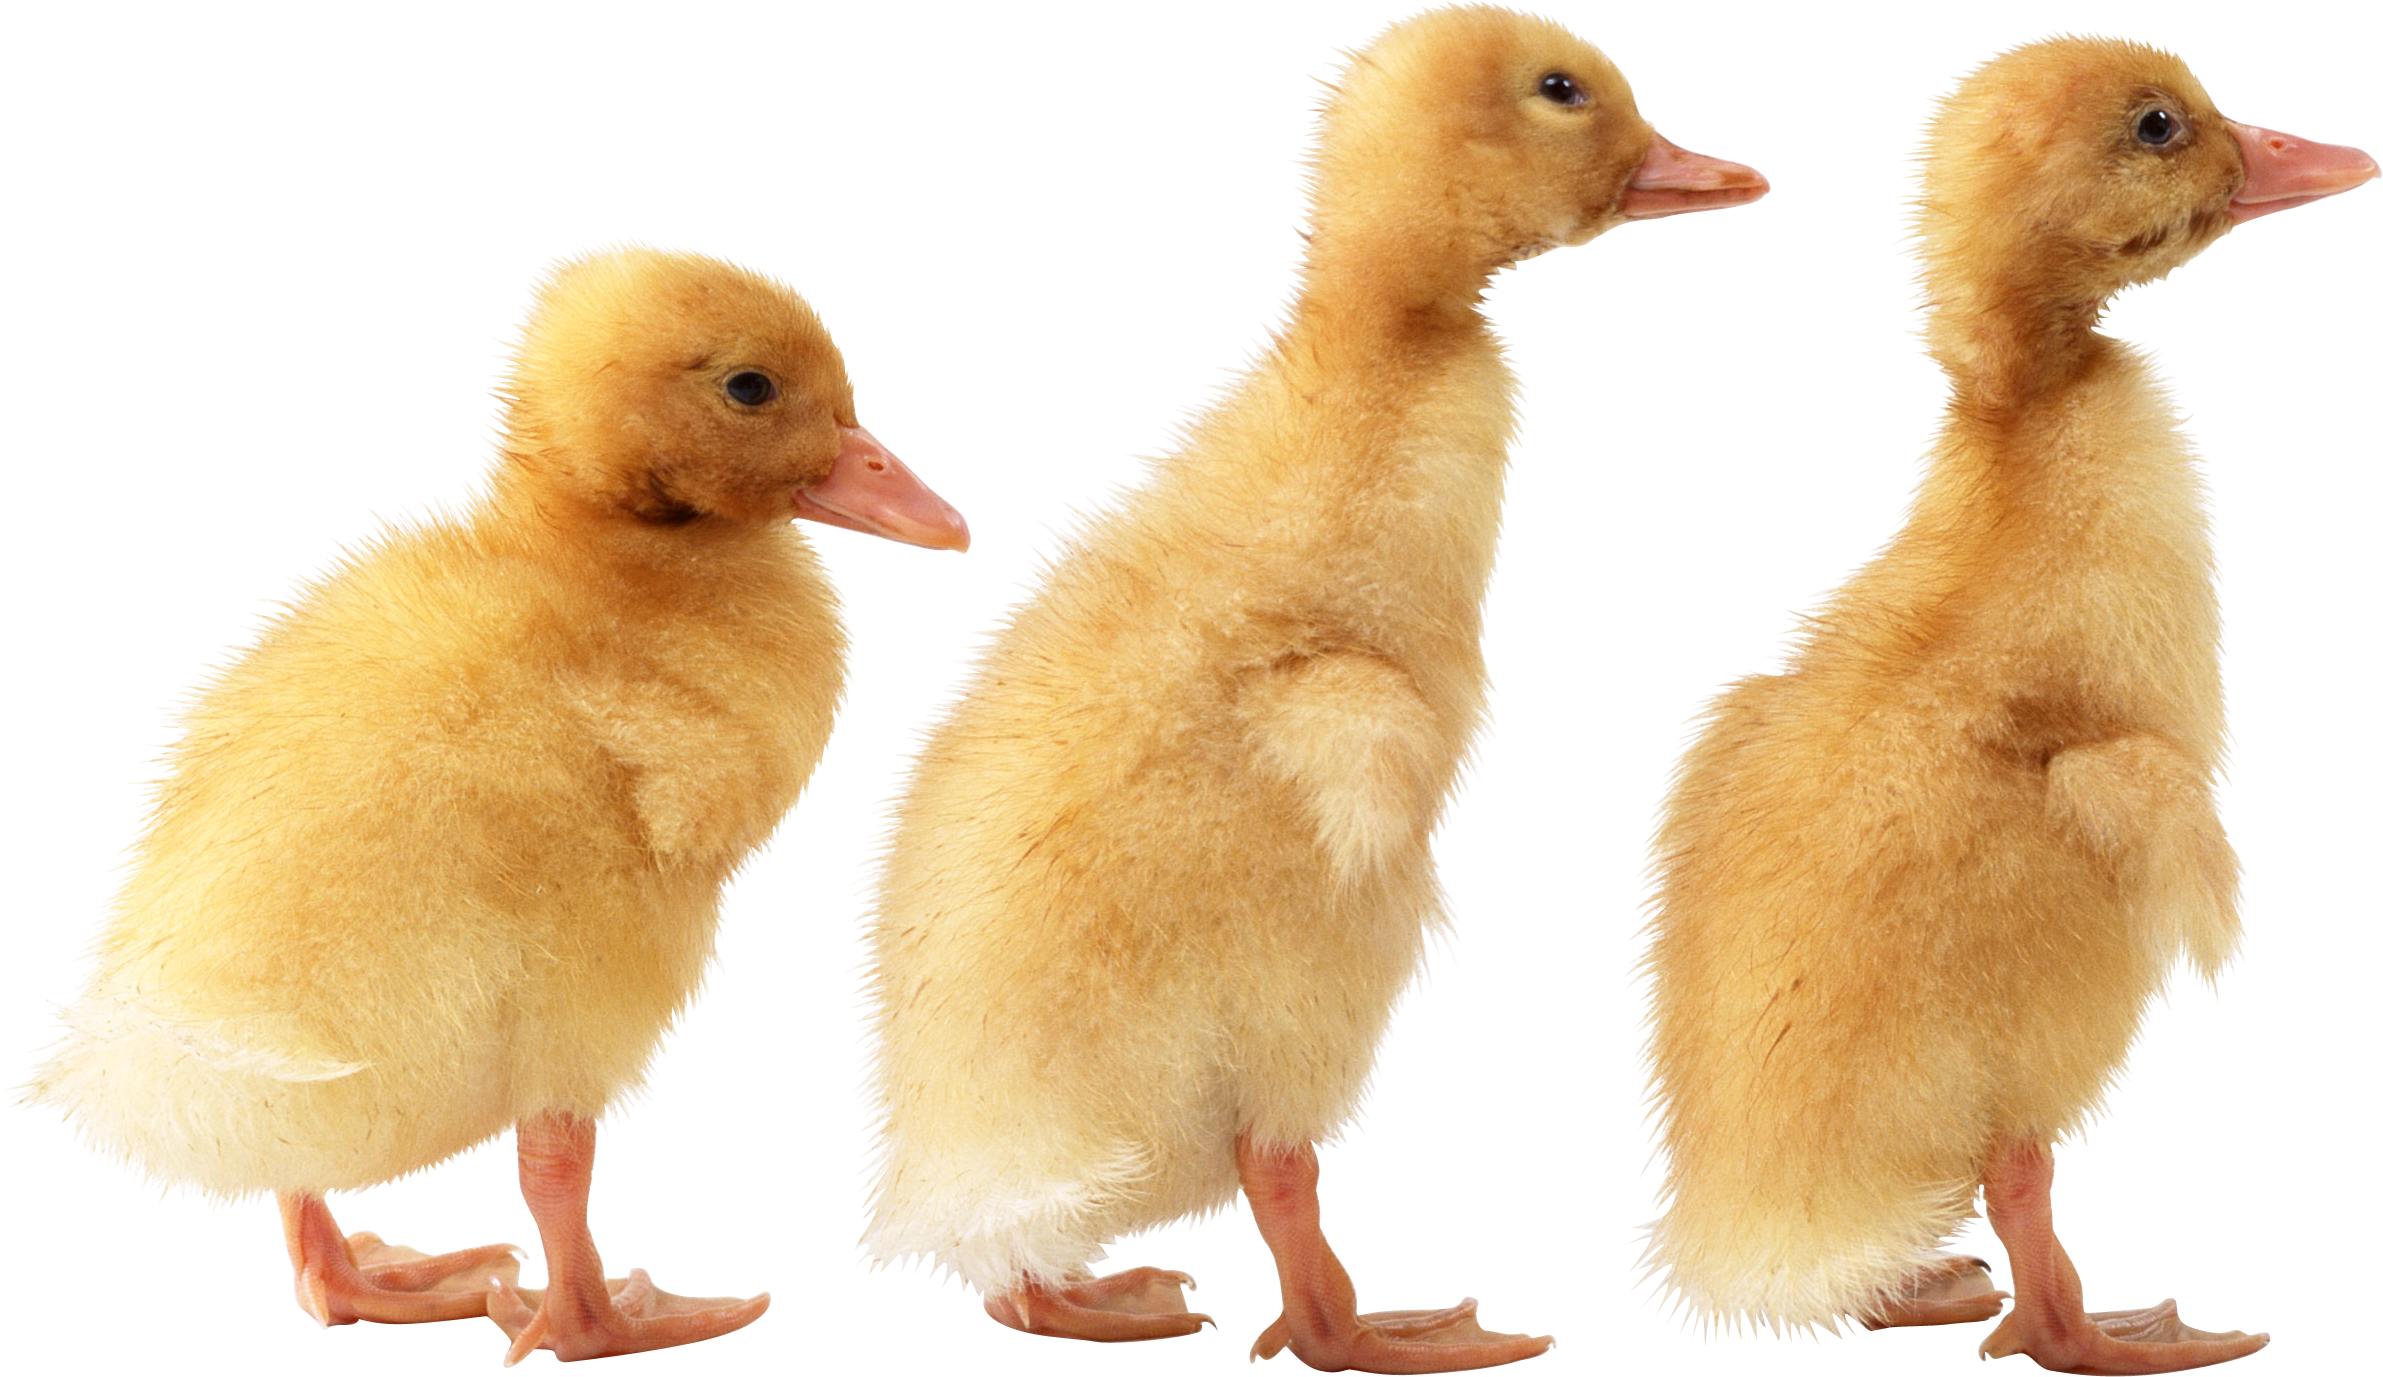 Duckling clipart three. Duck png image free